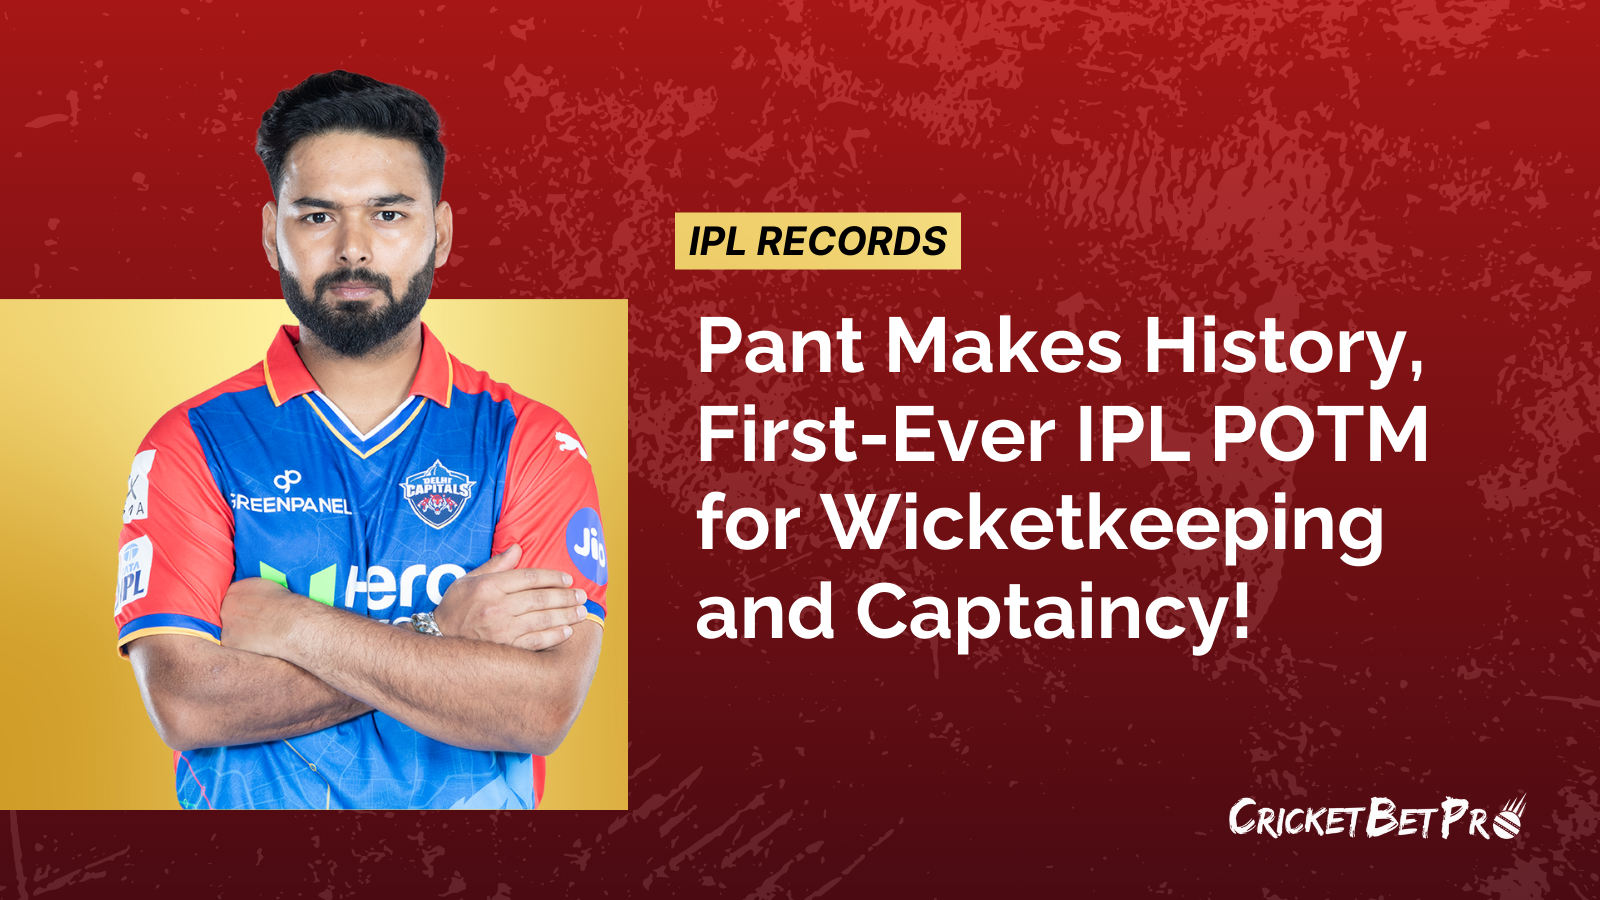 Pant-Makes-History-First-Ever-IPL-POTM-for-Wicketkeeping-and-Captaincy.png